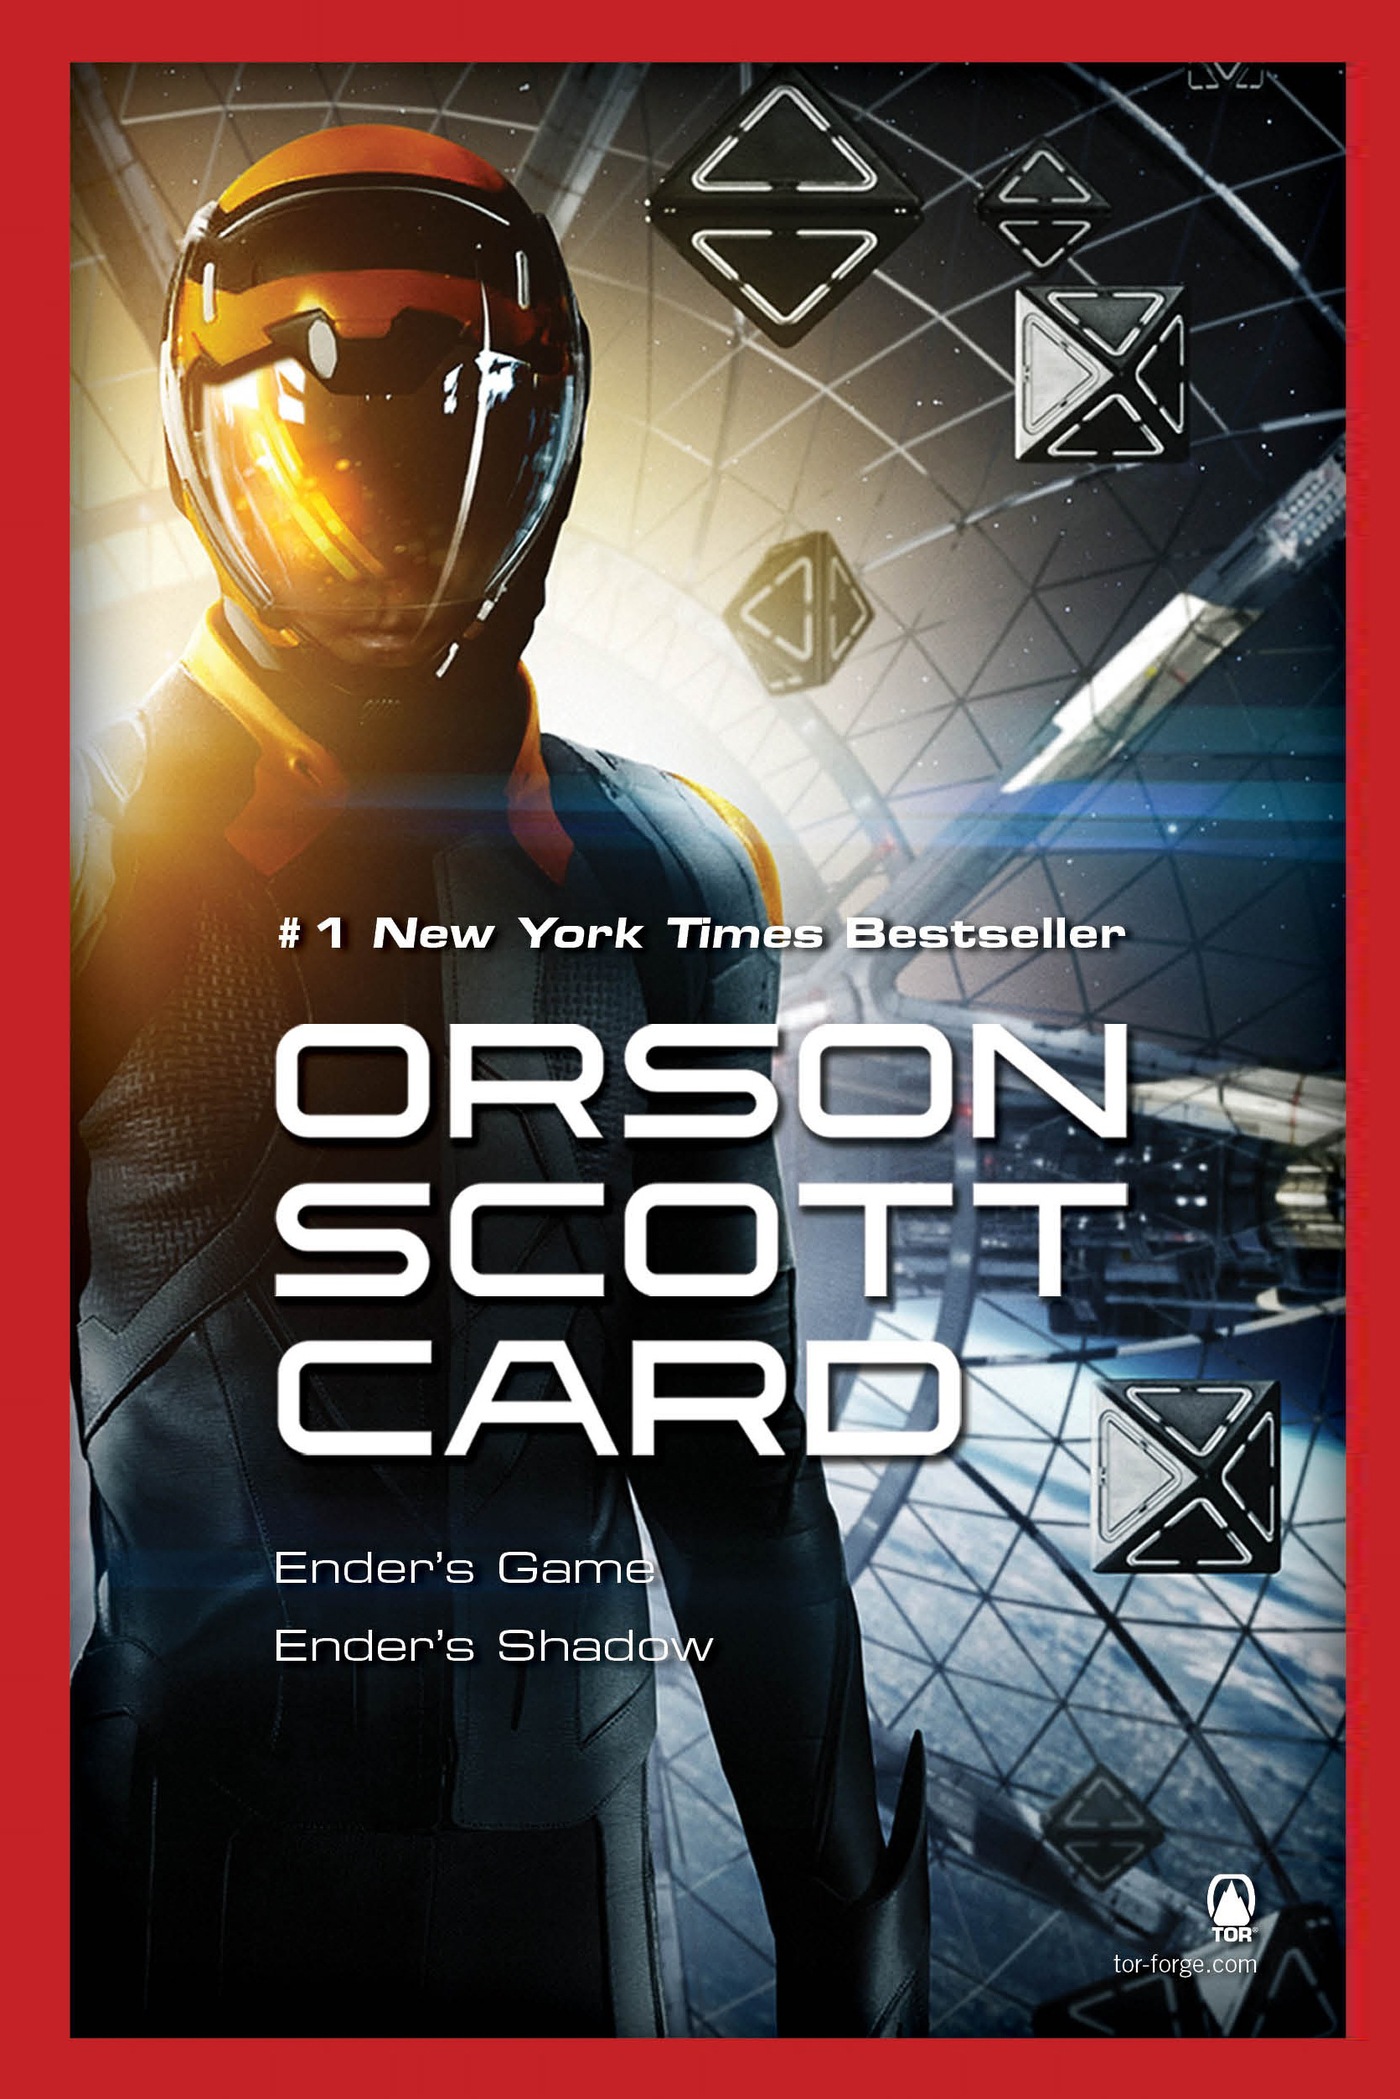 Ender's Game Boxed Set : Ender's Game, Ender's Shadow by Orson Scott Card